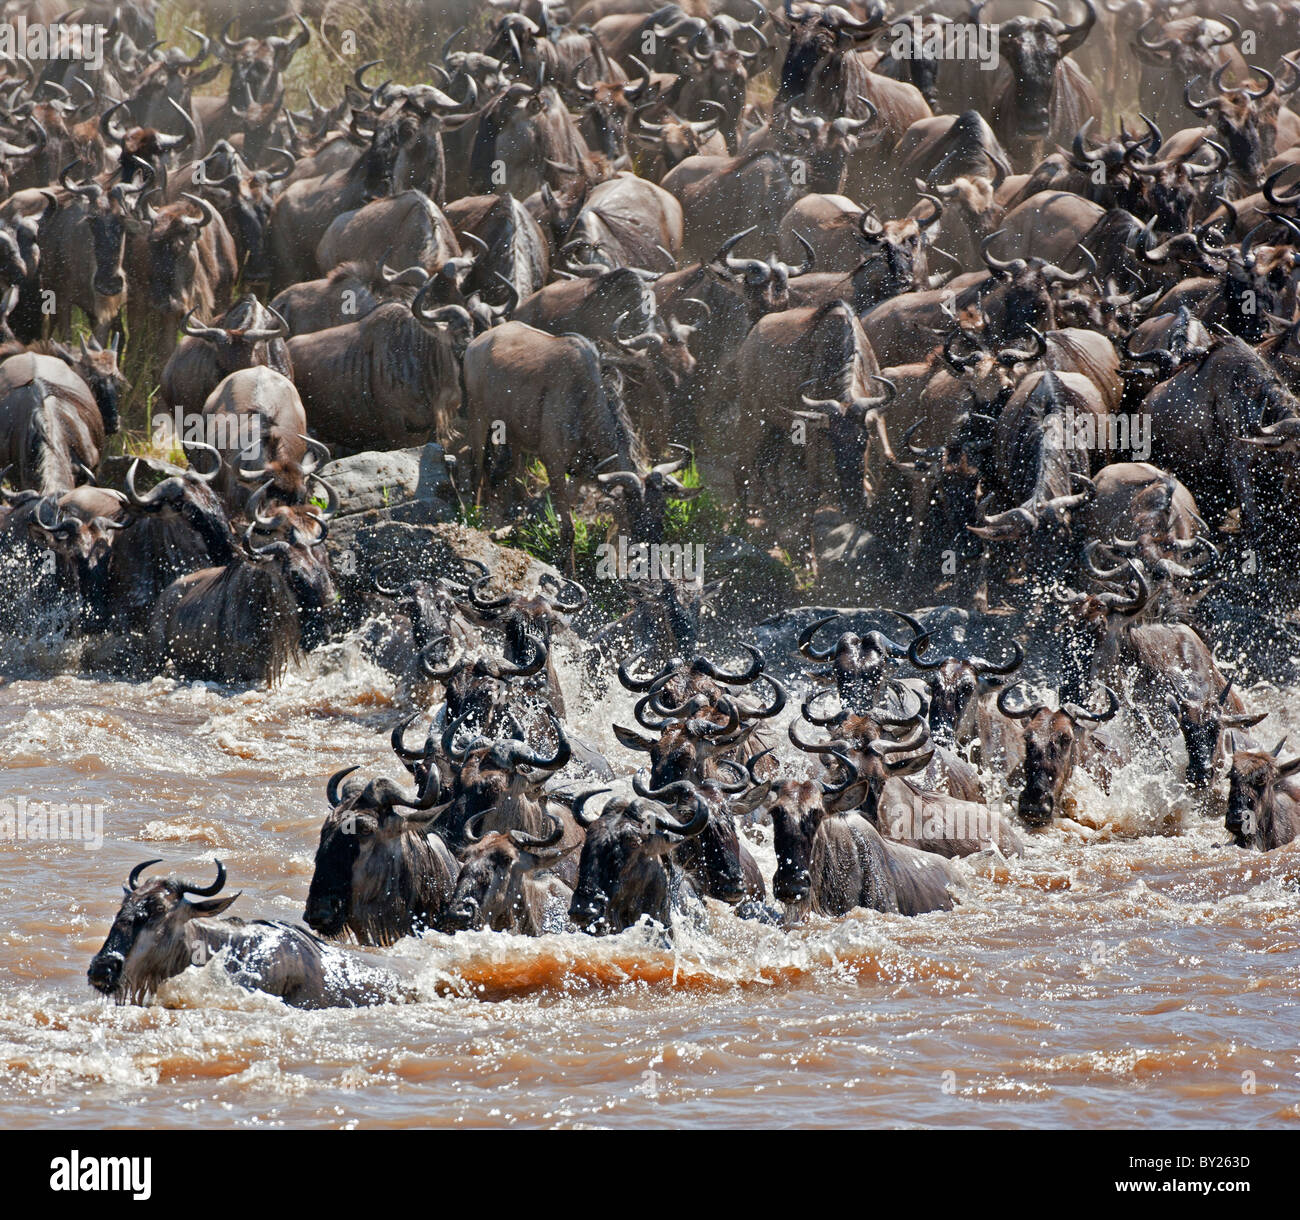 Wildebeest crossing the Mara River during their annual migration from the Serengeti National Park in Northern Tanzania to the Stock Photo